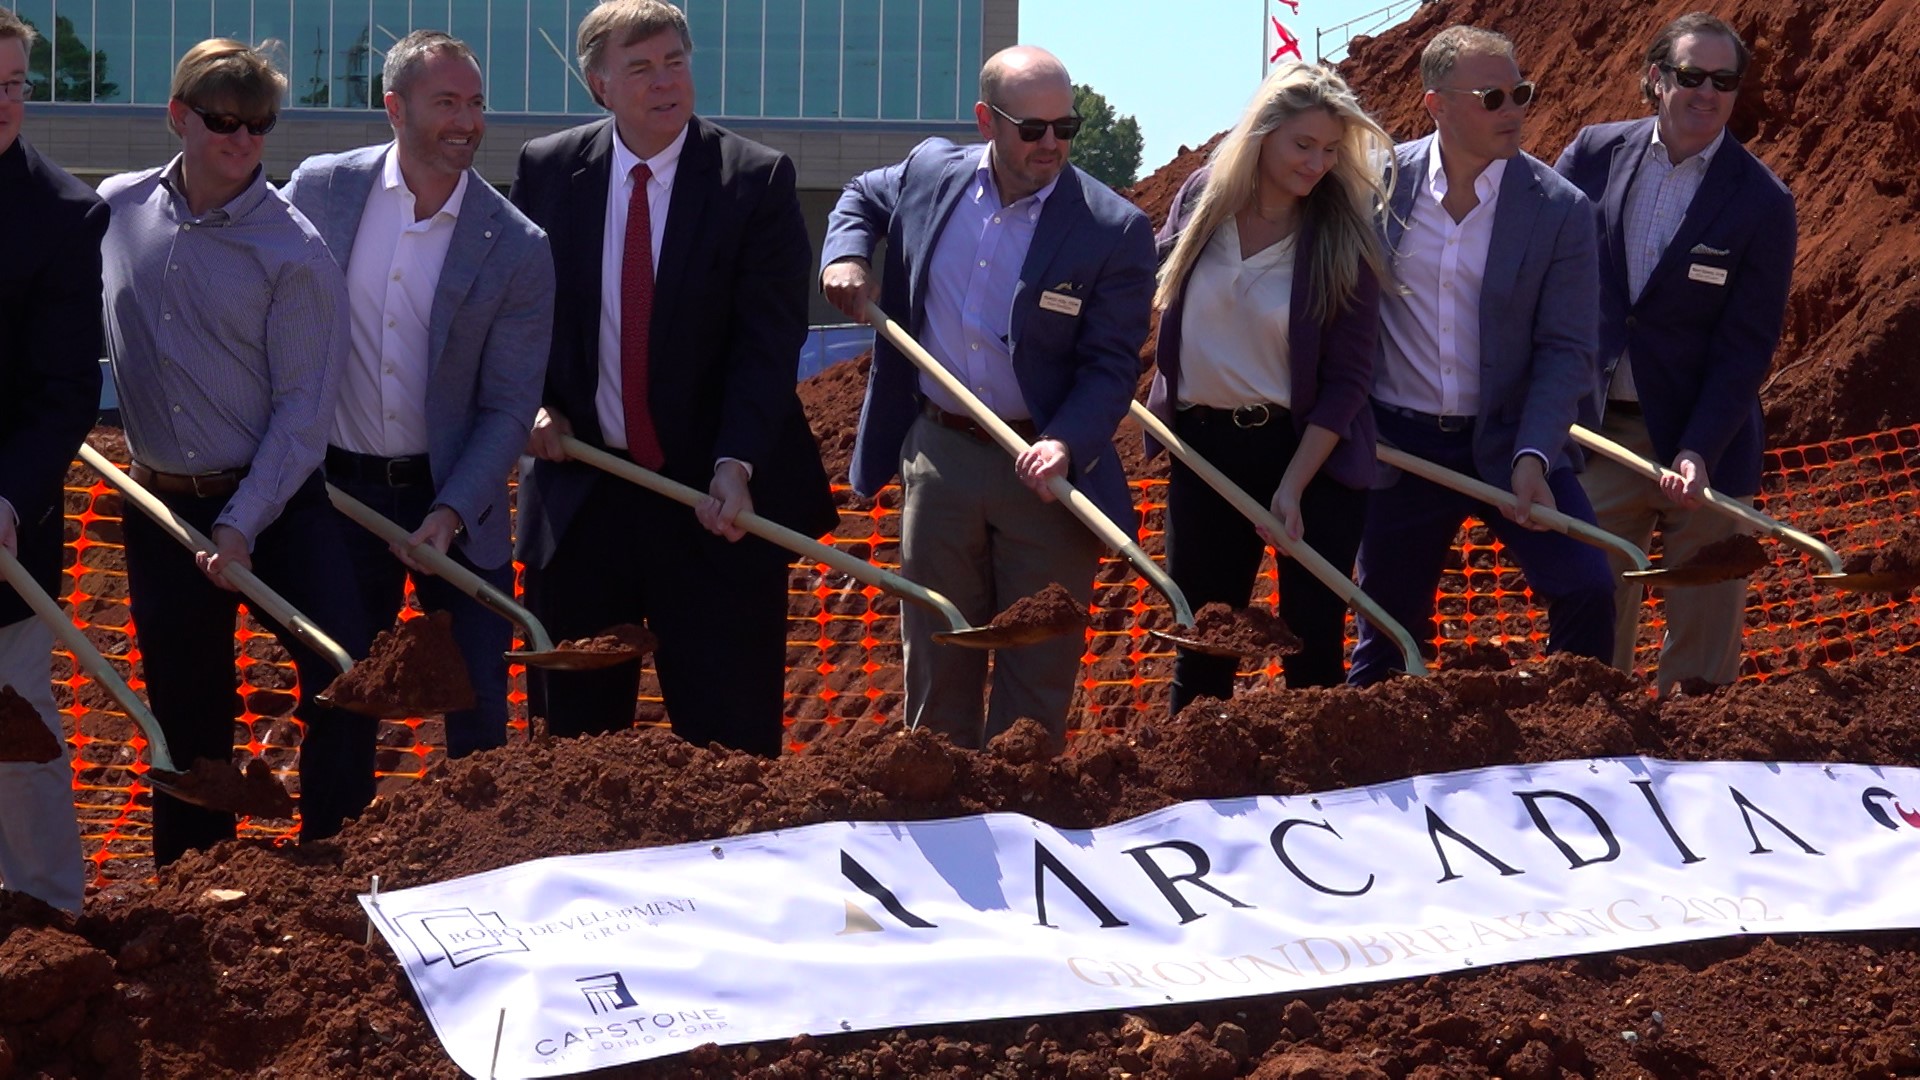 Cummings Research Park is welcoming a new mixed-use development known as the "Arcadia".